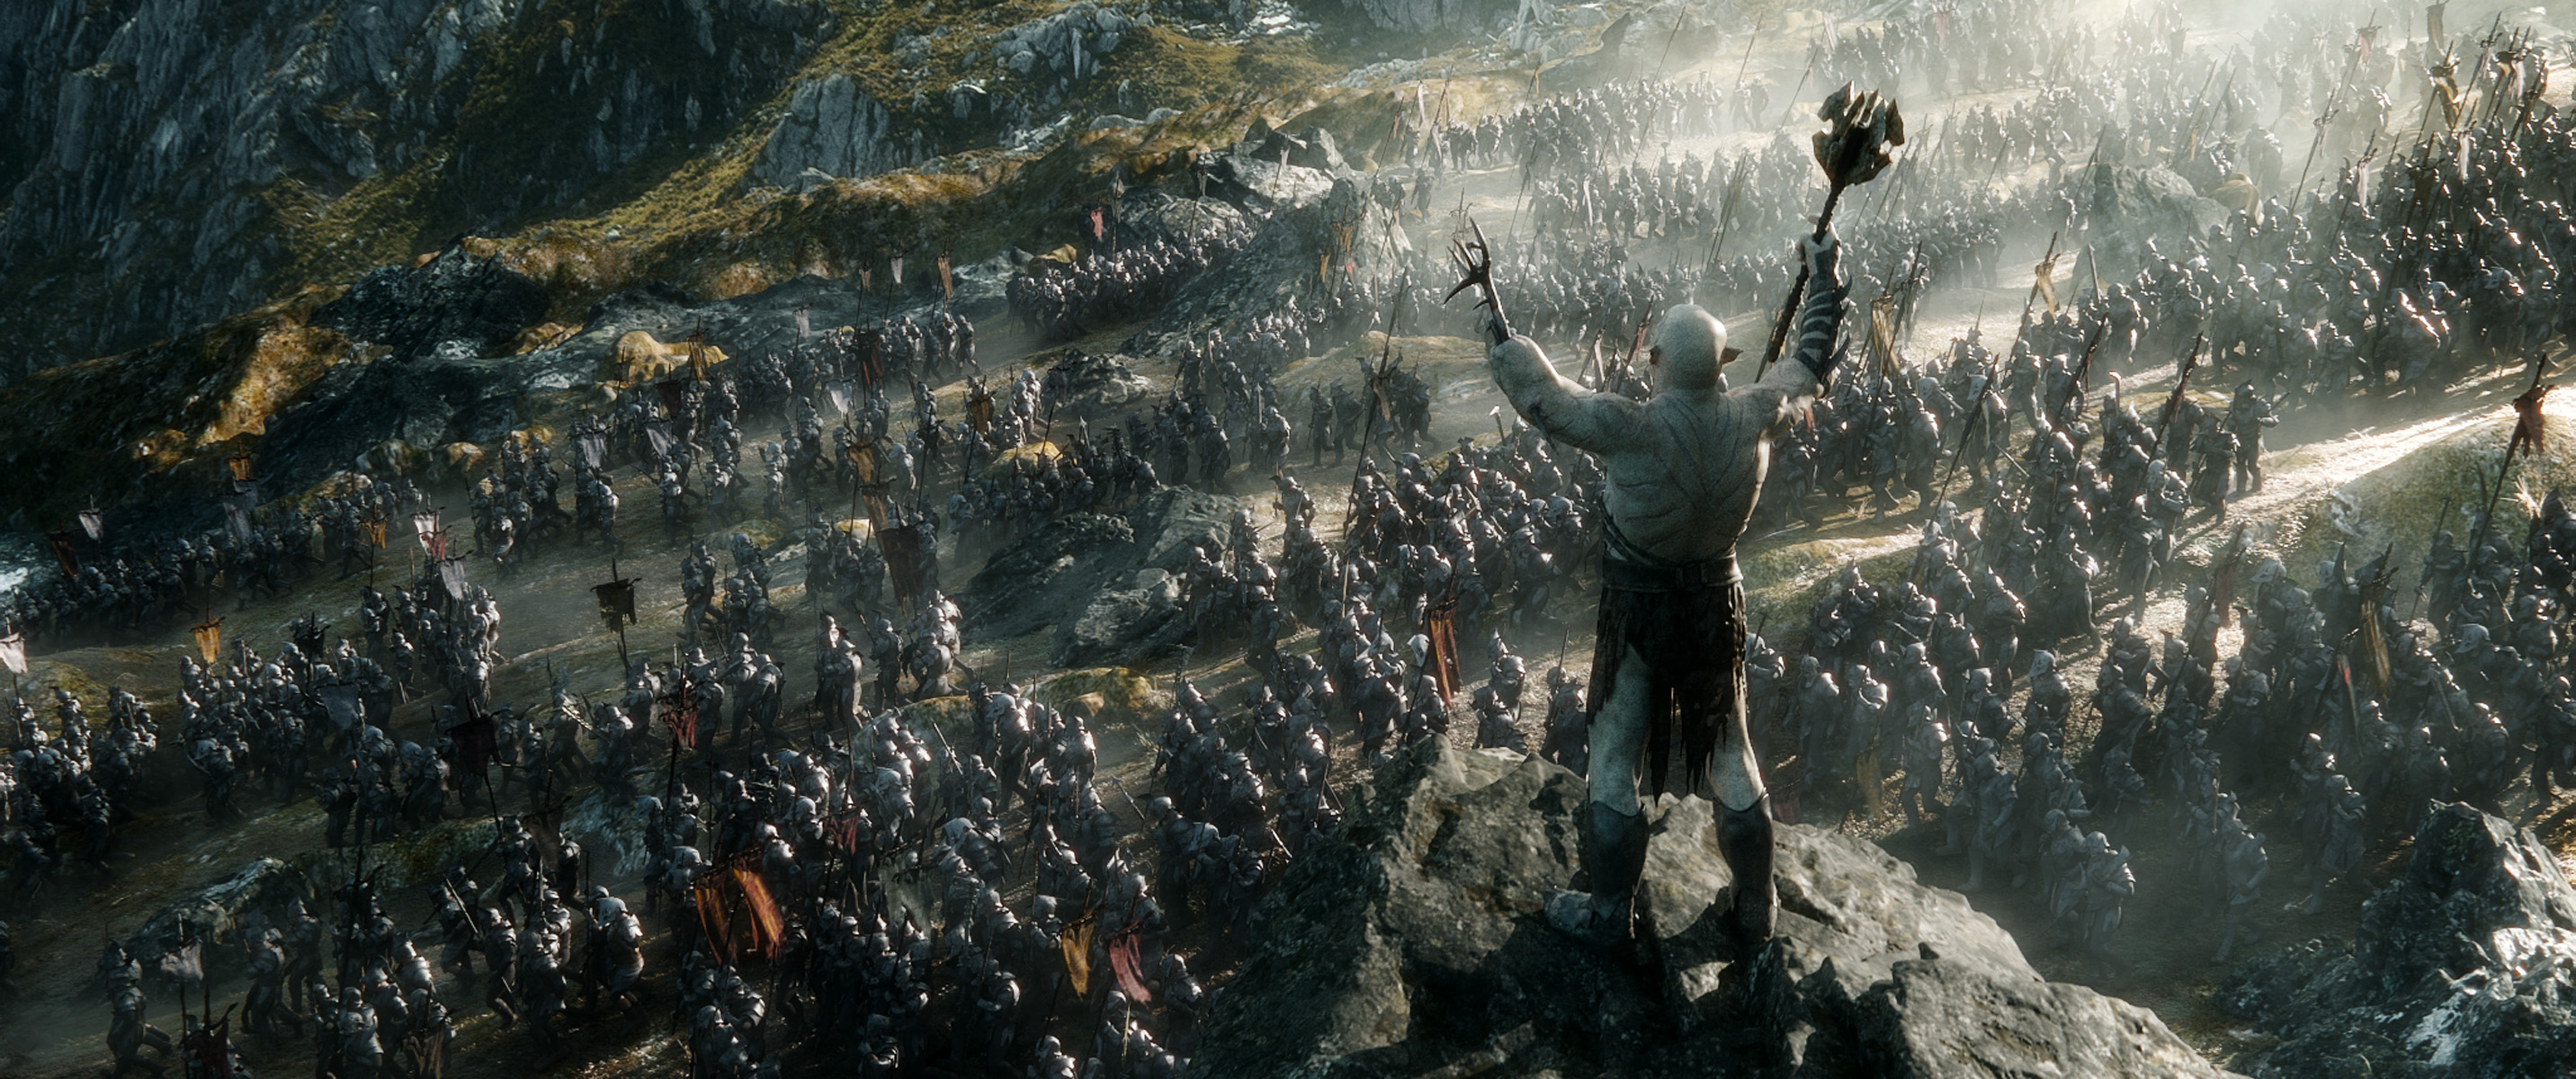 The Hobbit The Battle of the Five Armies - Teaser Trailer